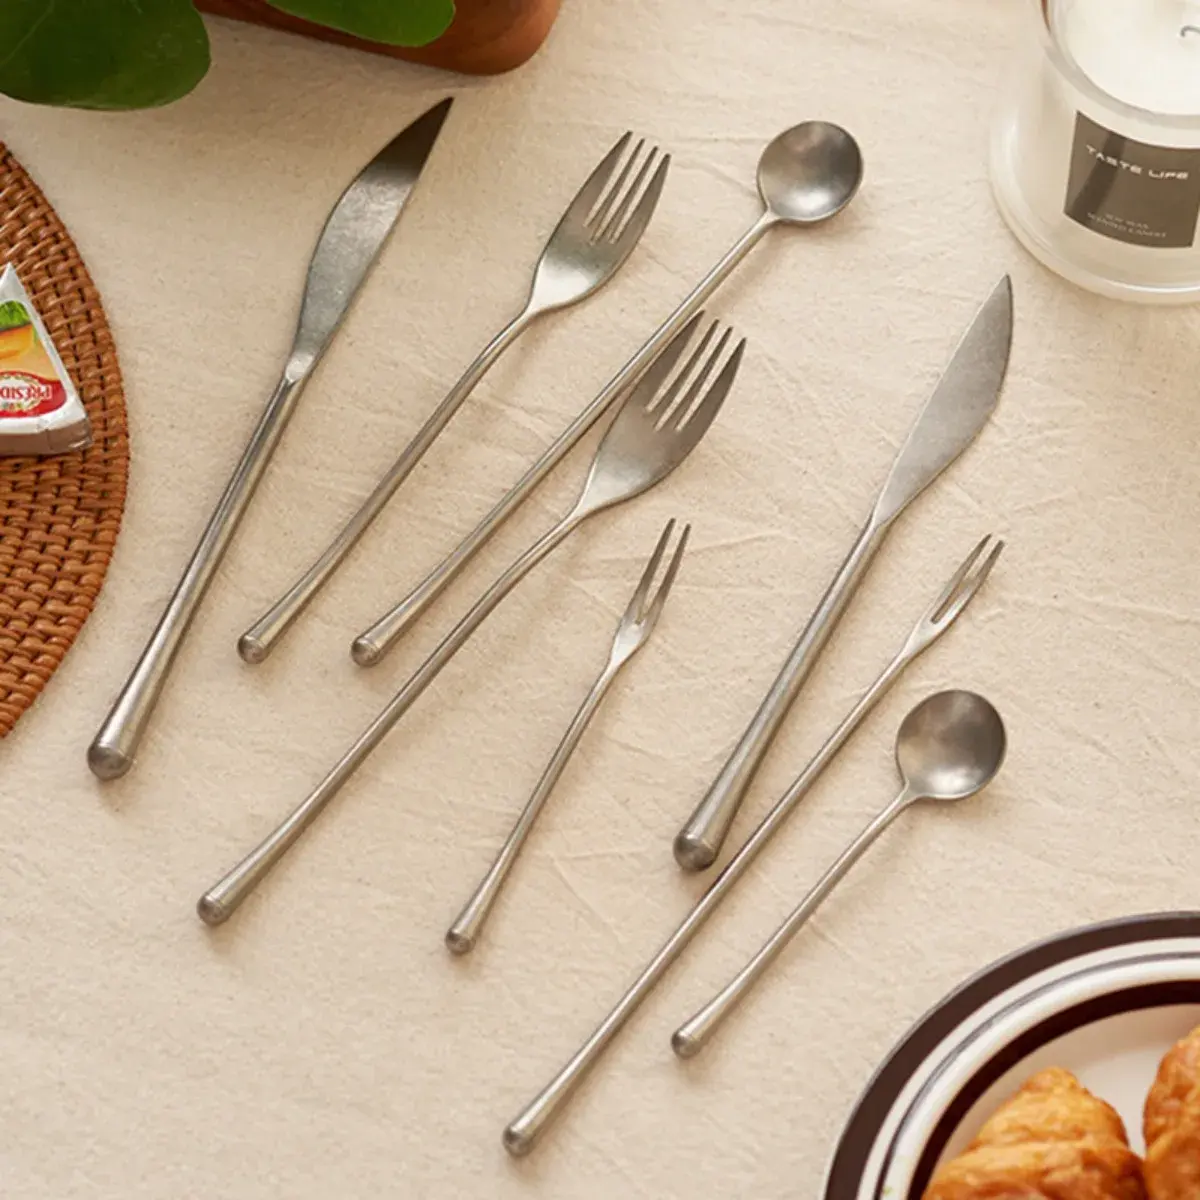 Ancient And Elegant Stainless Steel Cutlery Set Knives Forks Spoons For Meals/Desserts/Fruits Tableware For Family Wedding Party